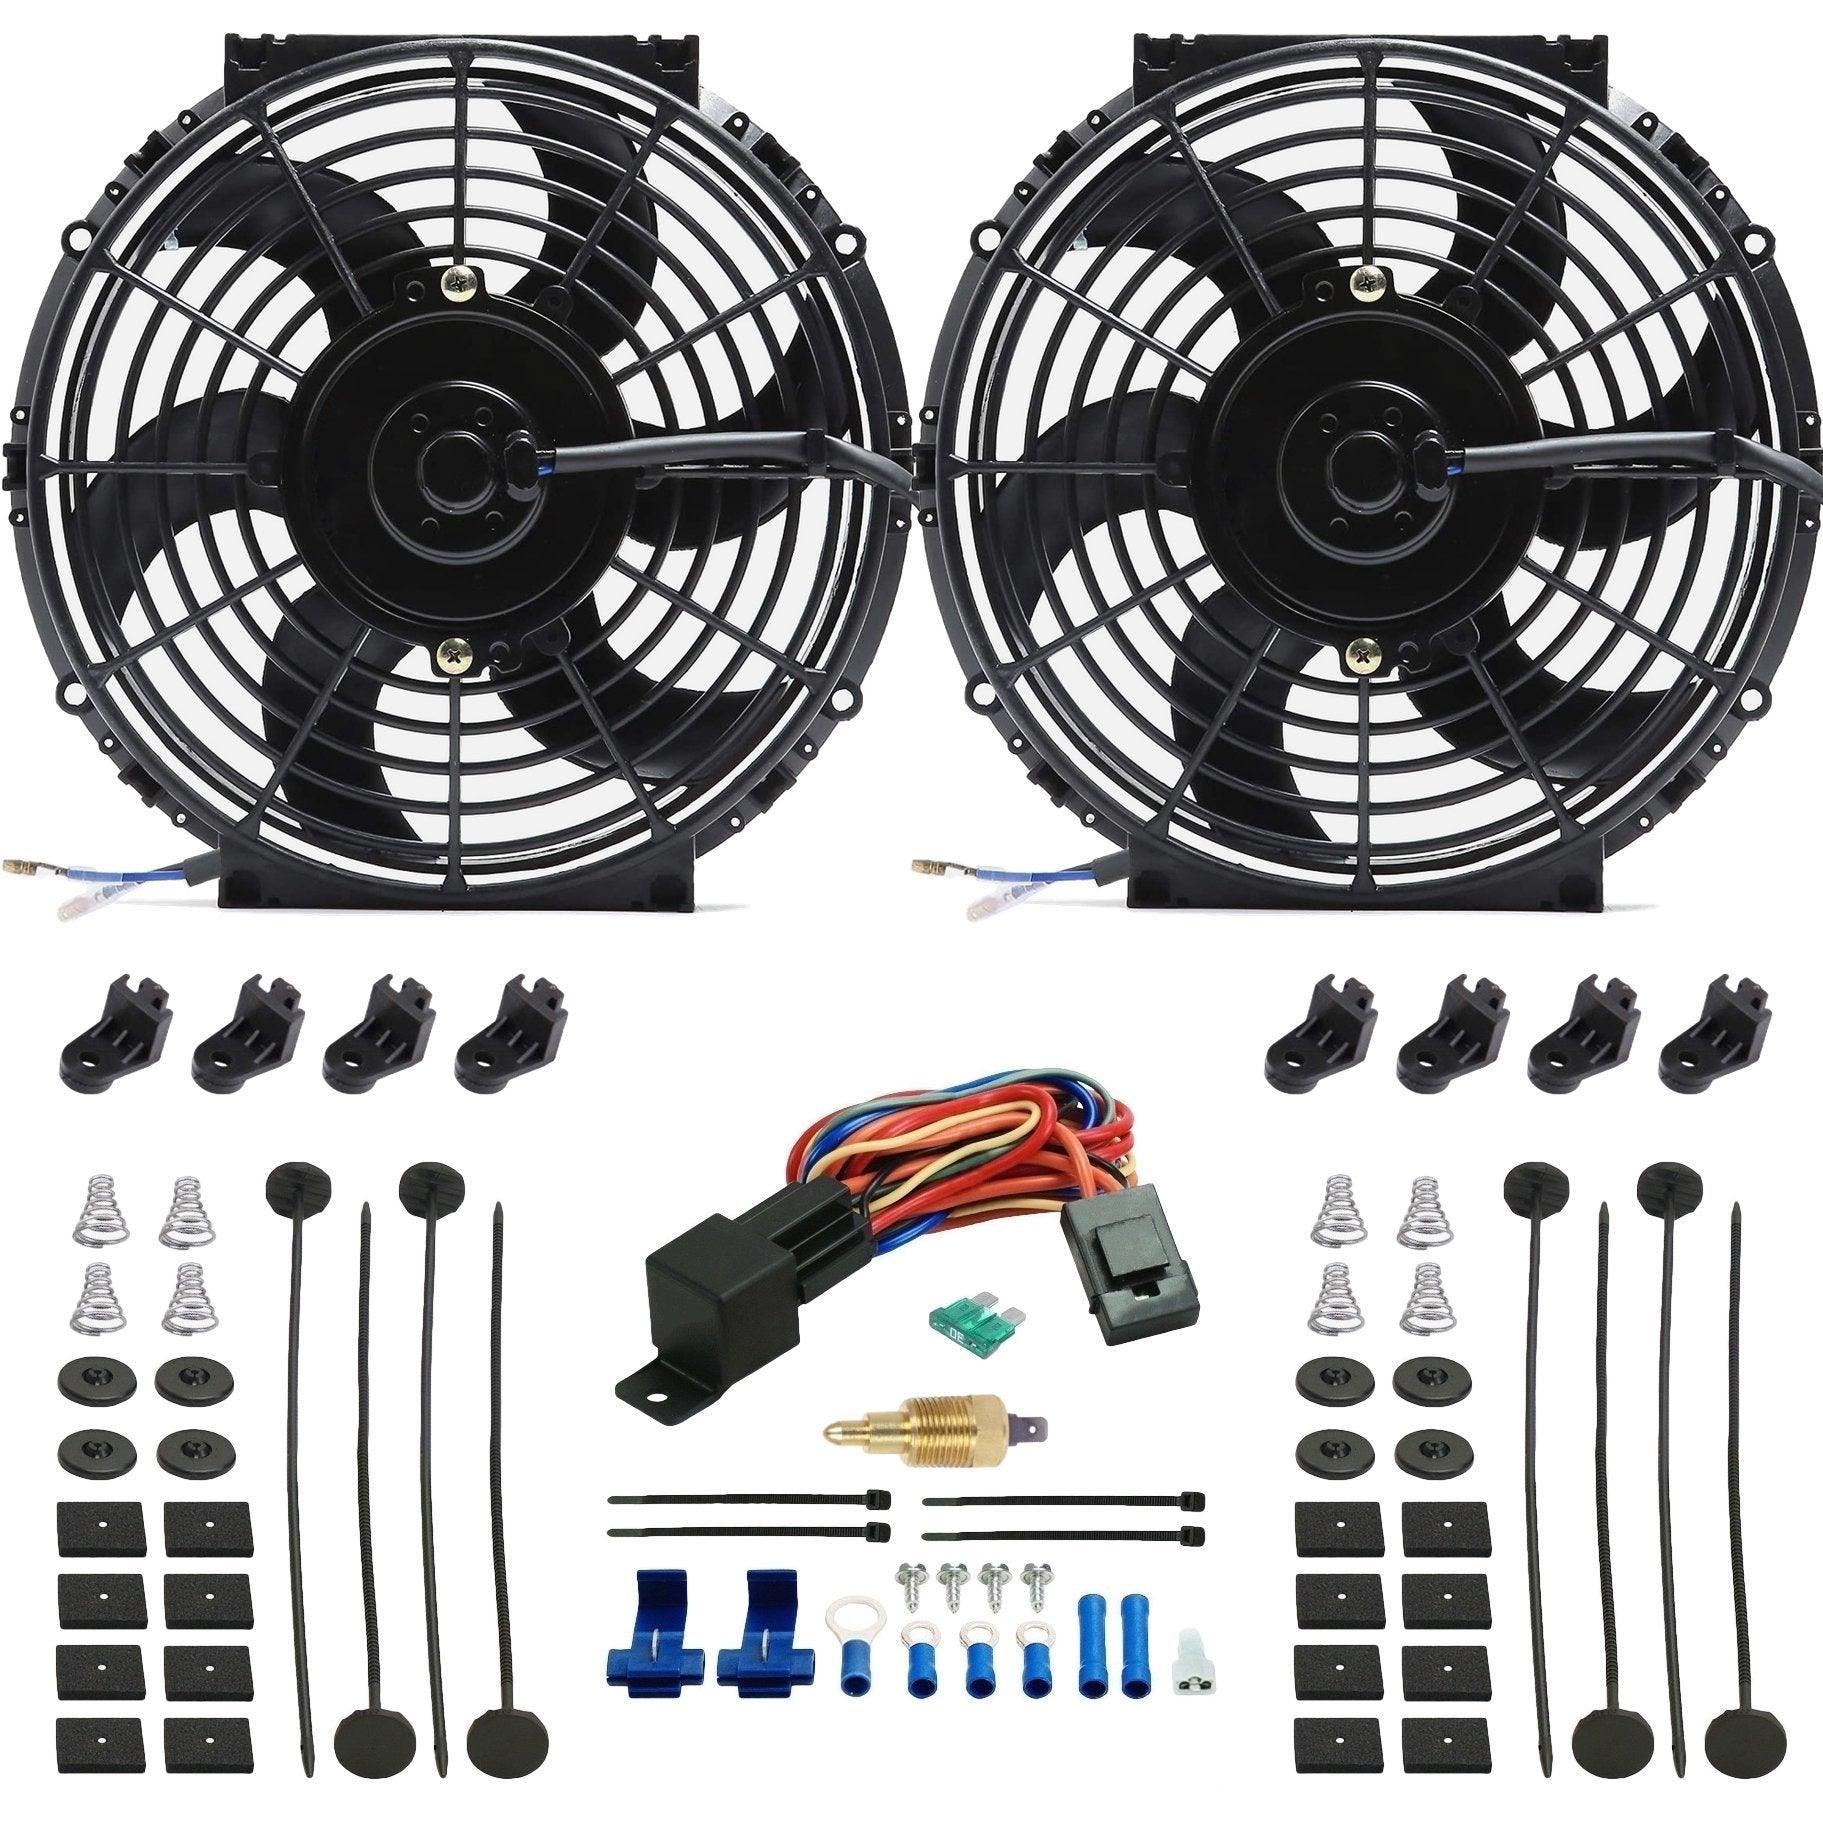 http://www.americanvolt.com/cdn/shop/products/Dual-10-11-Inch-Electric-Car-Truck-Radiator-Cooling-Fans-Thermostat-Ground-Switch-Wiring-Kit-American-Volt.jpg?v=1677684375